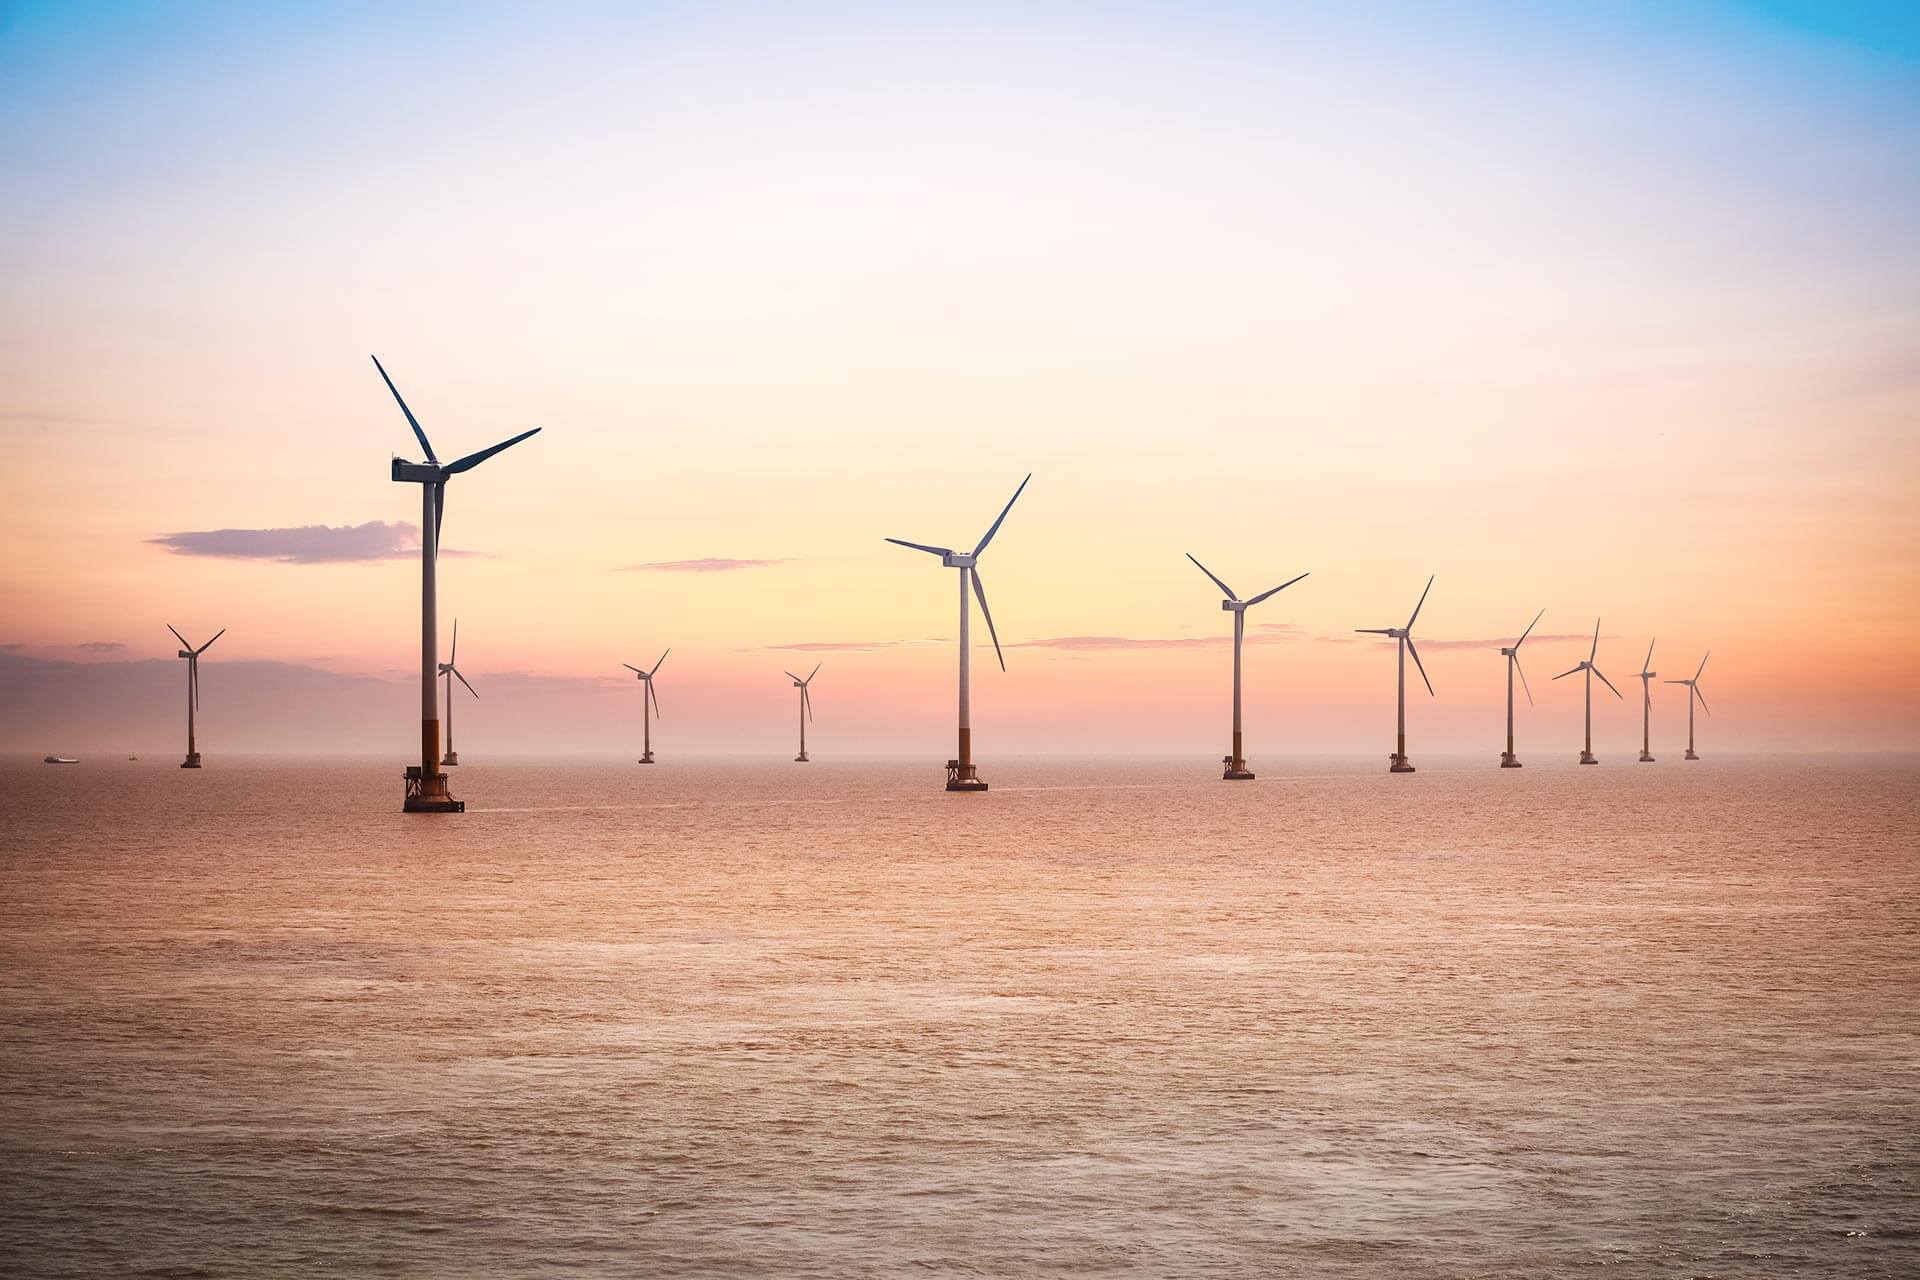 A series of offshore wind turbines at sunrise.